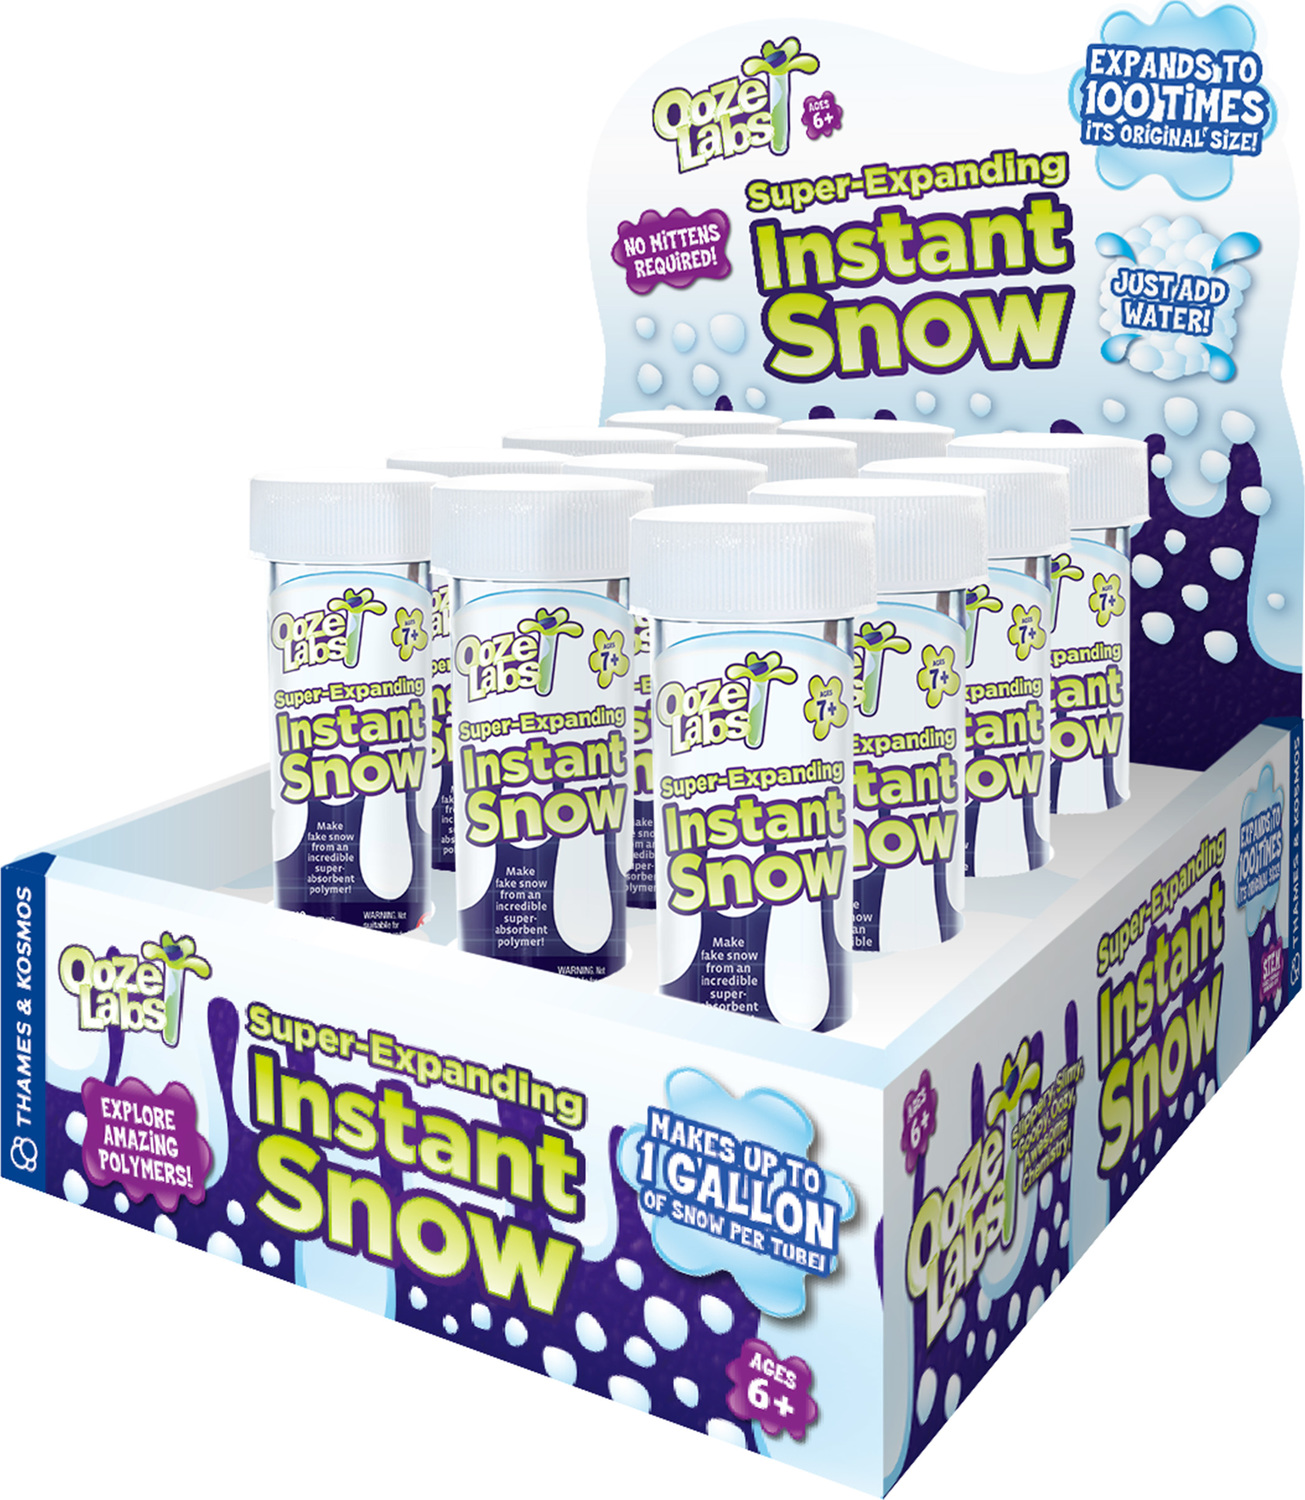 Super-Expanding Instant Snow - Toys To Love